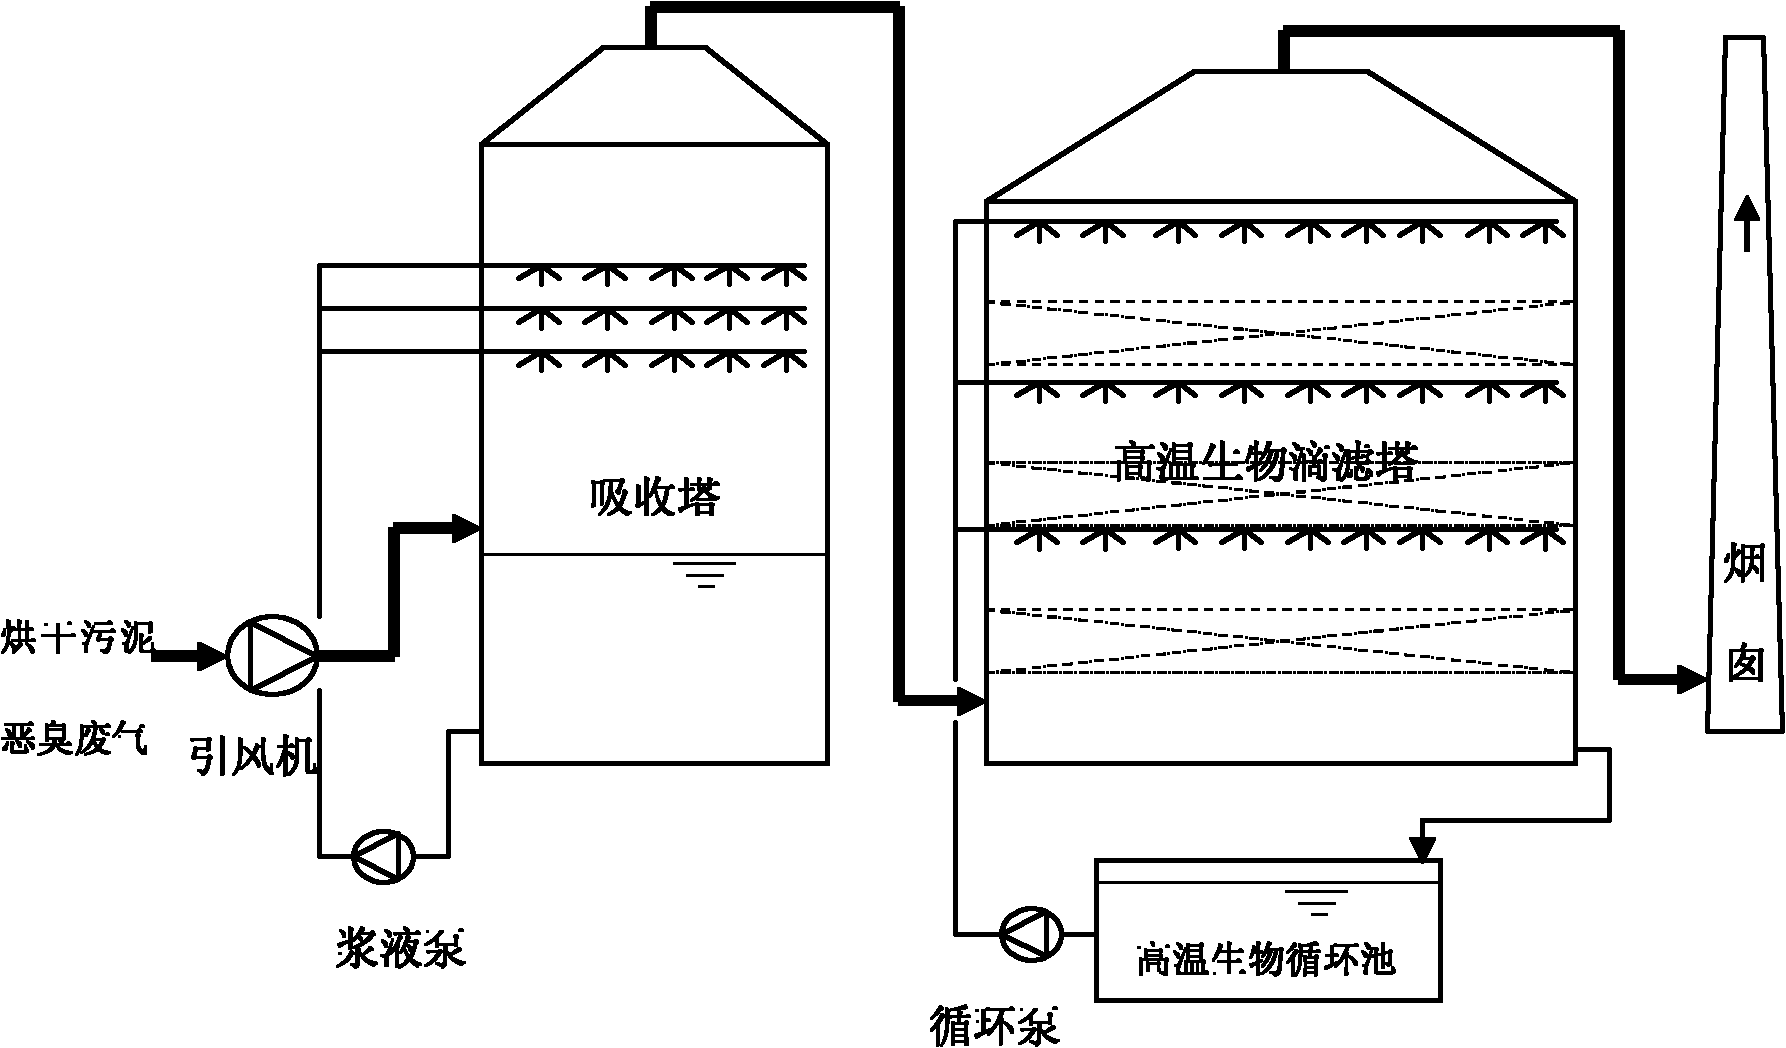 Purification method of odor waste gas produced by high-temperature dewatering of sludge